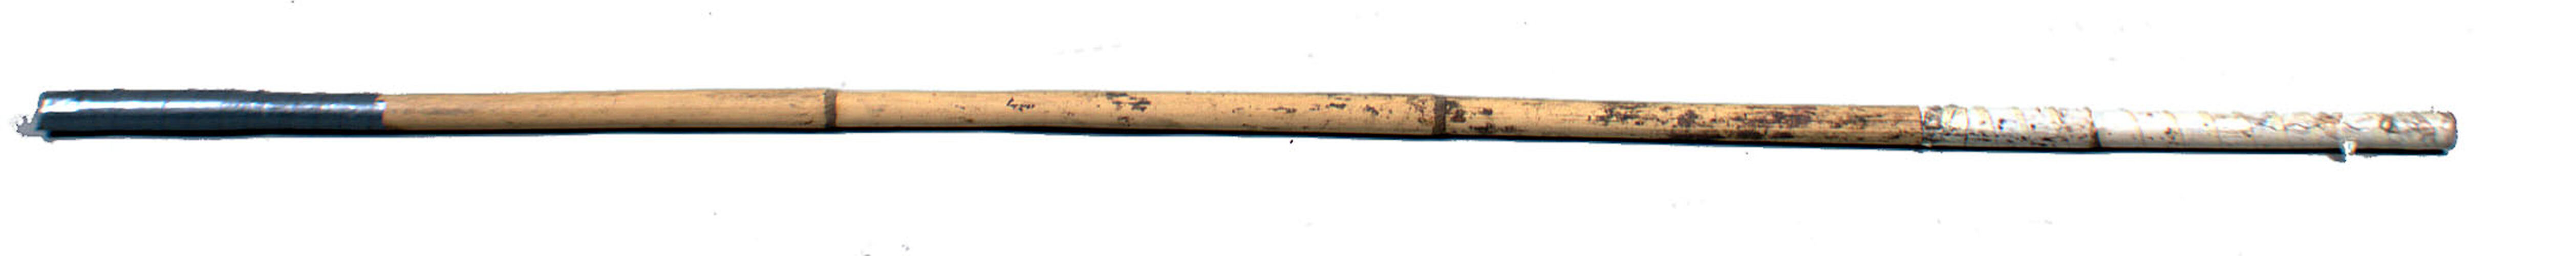 Long cane stick for prodding cattle.